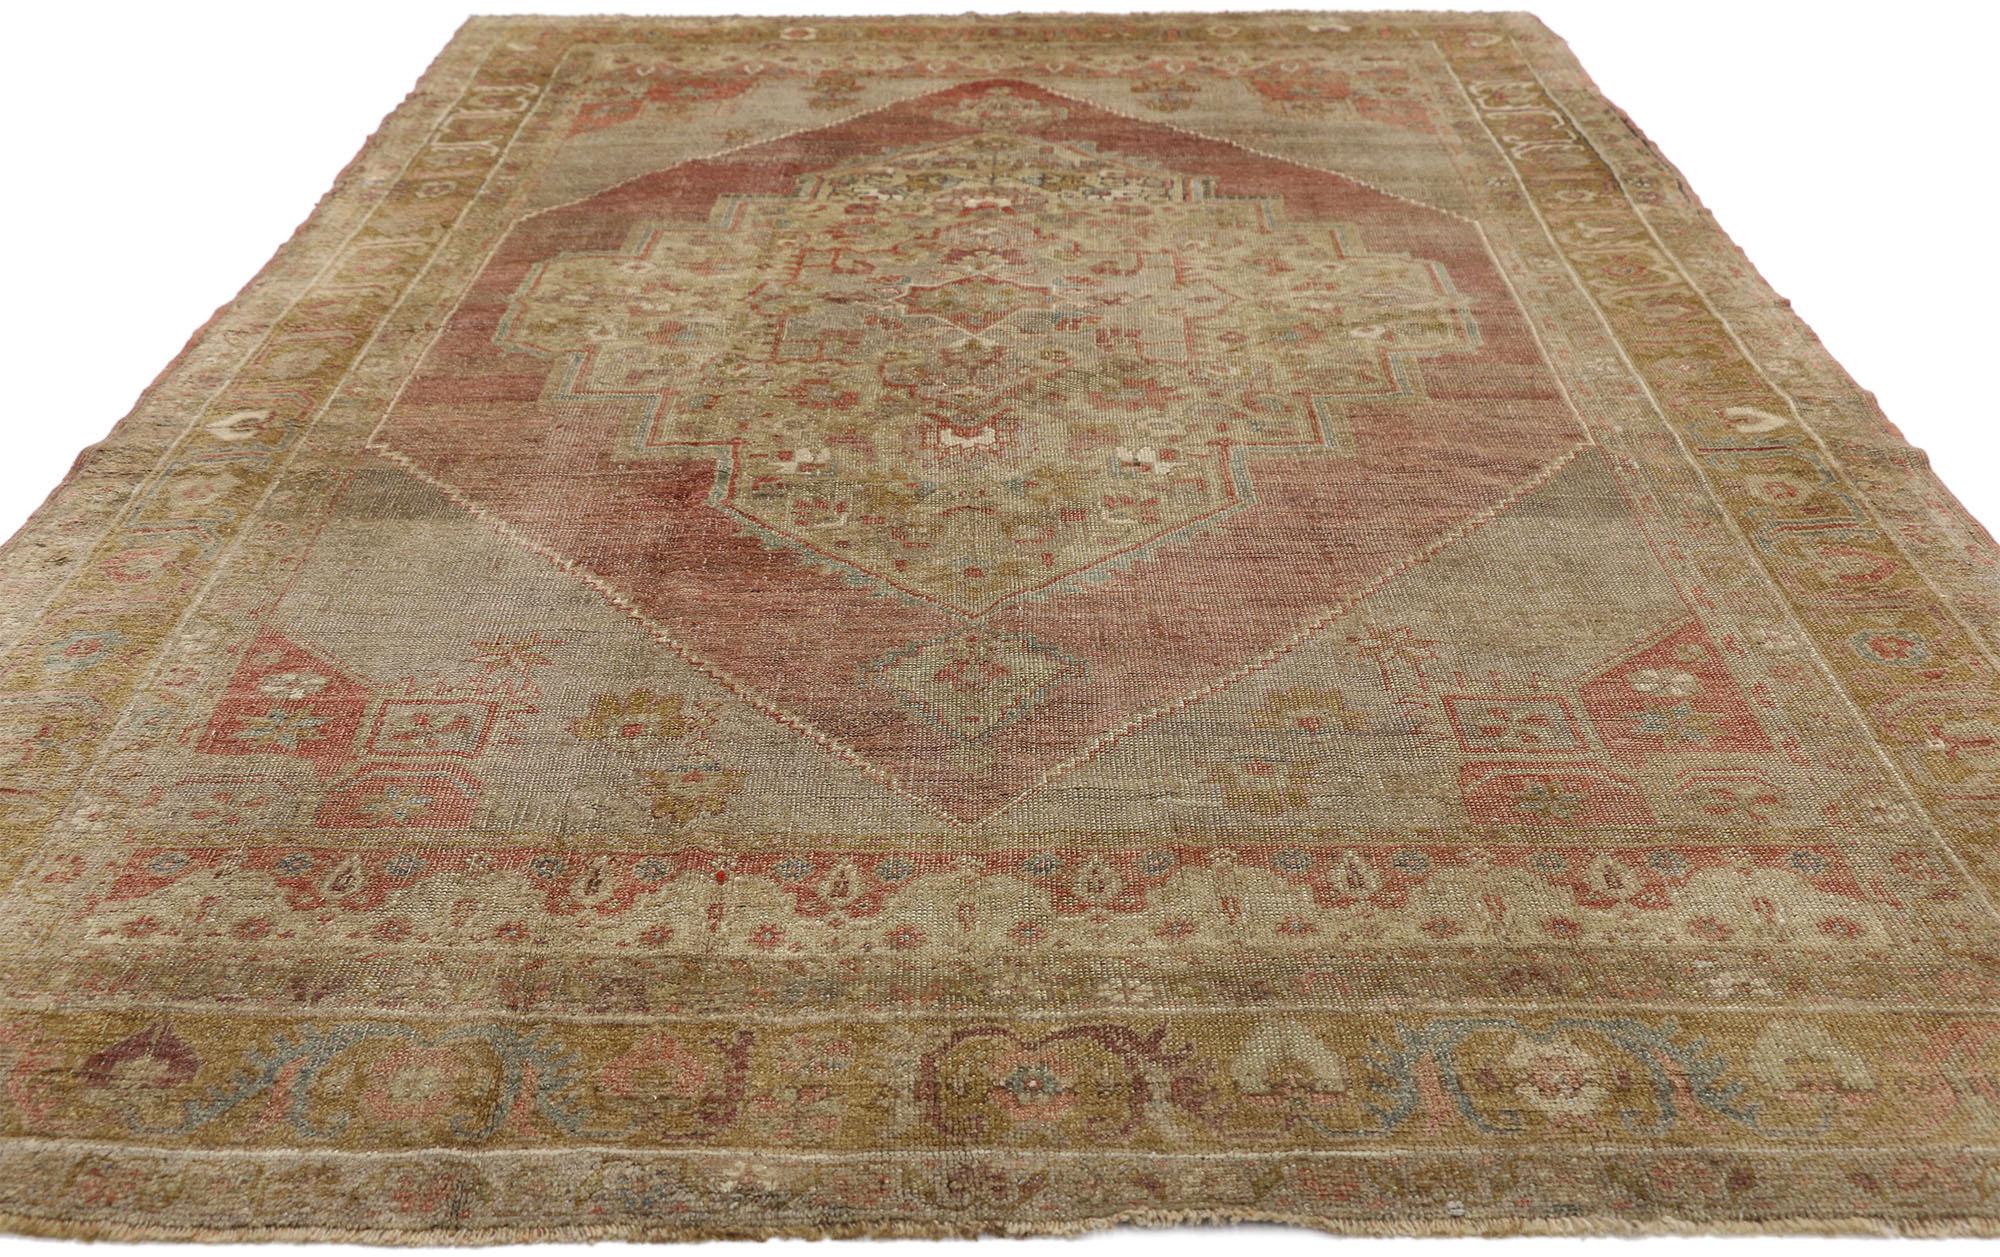 52443, distressed vintage Turkish Oushak rug with Rustic Jacobean style. Soft and sumptuous, this hand knotted wool vintage Turkish Oushak rug with Jacobean style brings regal allure and rusticity to any interior it graces. Gentle abrash gradations